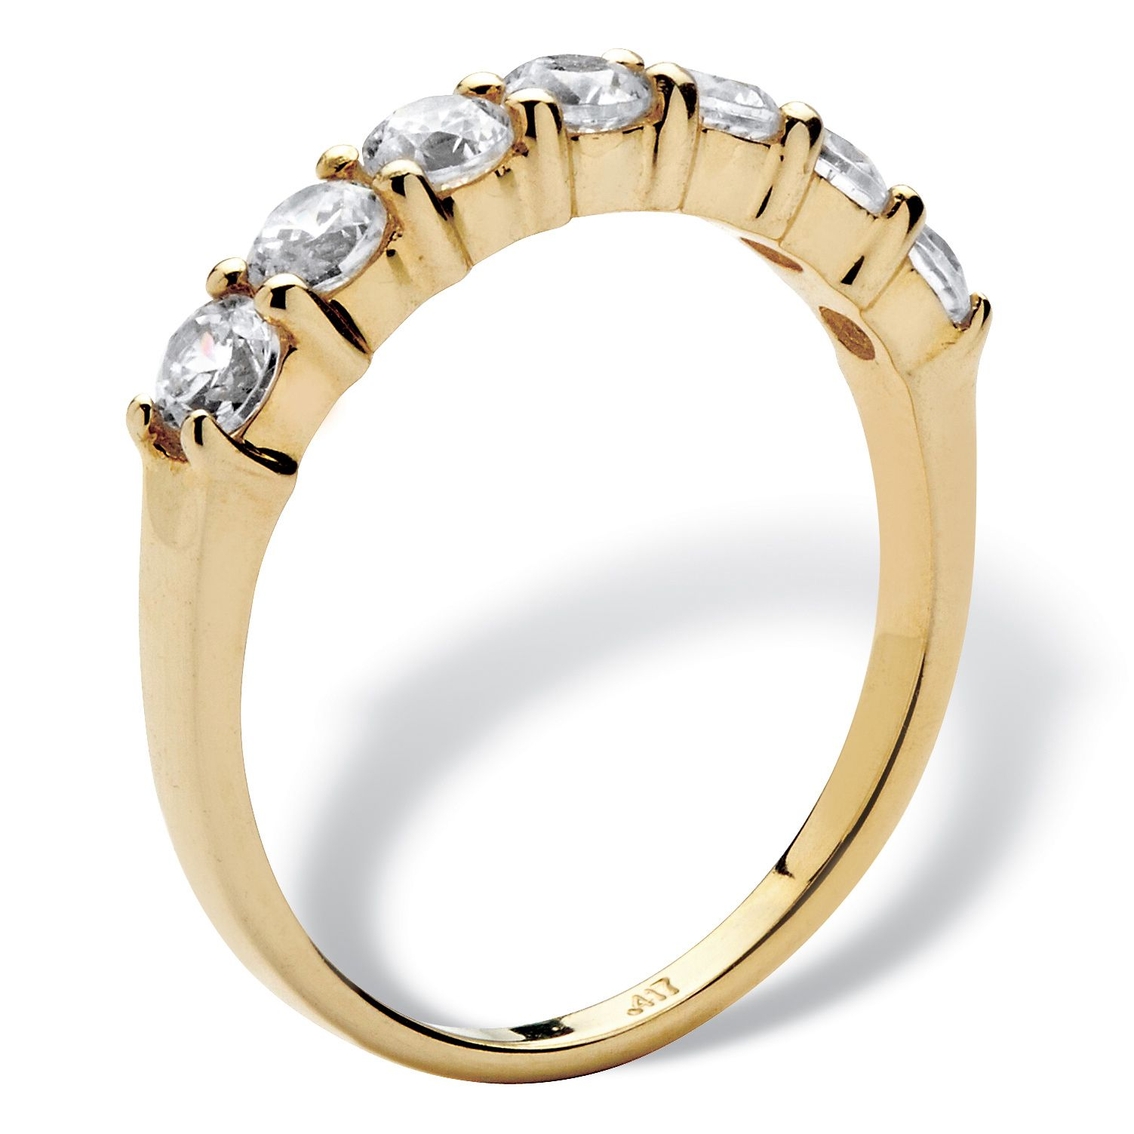 Round Cubic Zirconia Wedding Anniversary Band Ring .70 TCW in Solid 10k Yellow Gold - Image 2 of 5